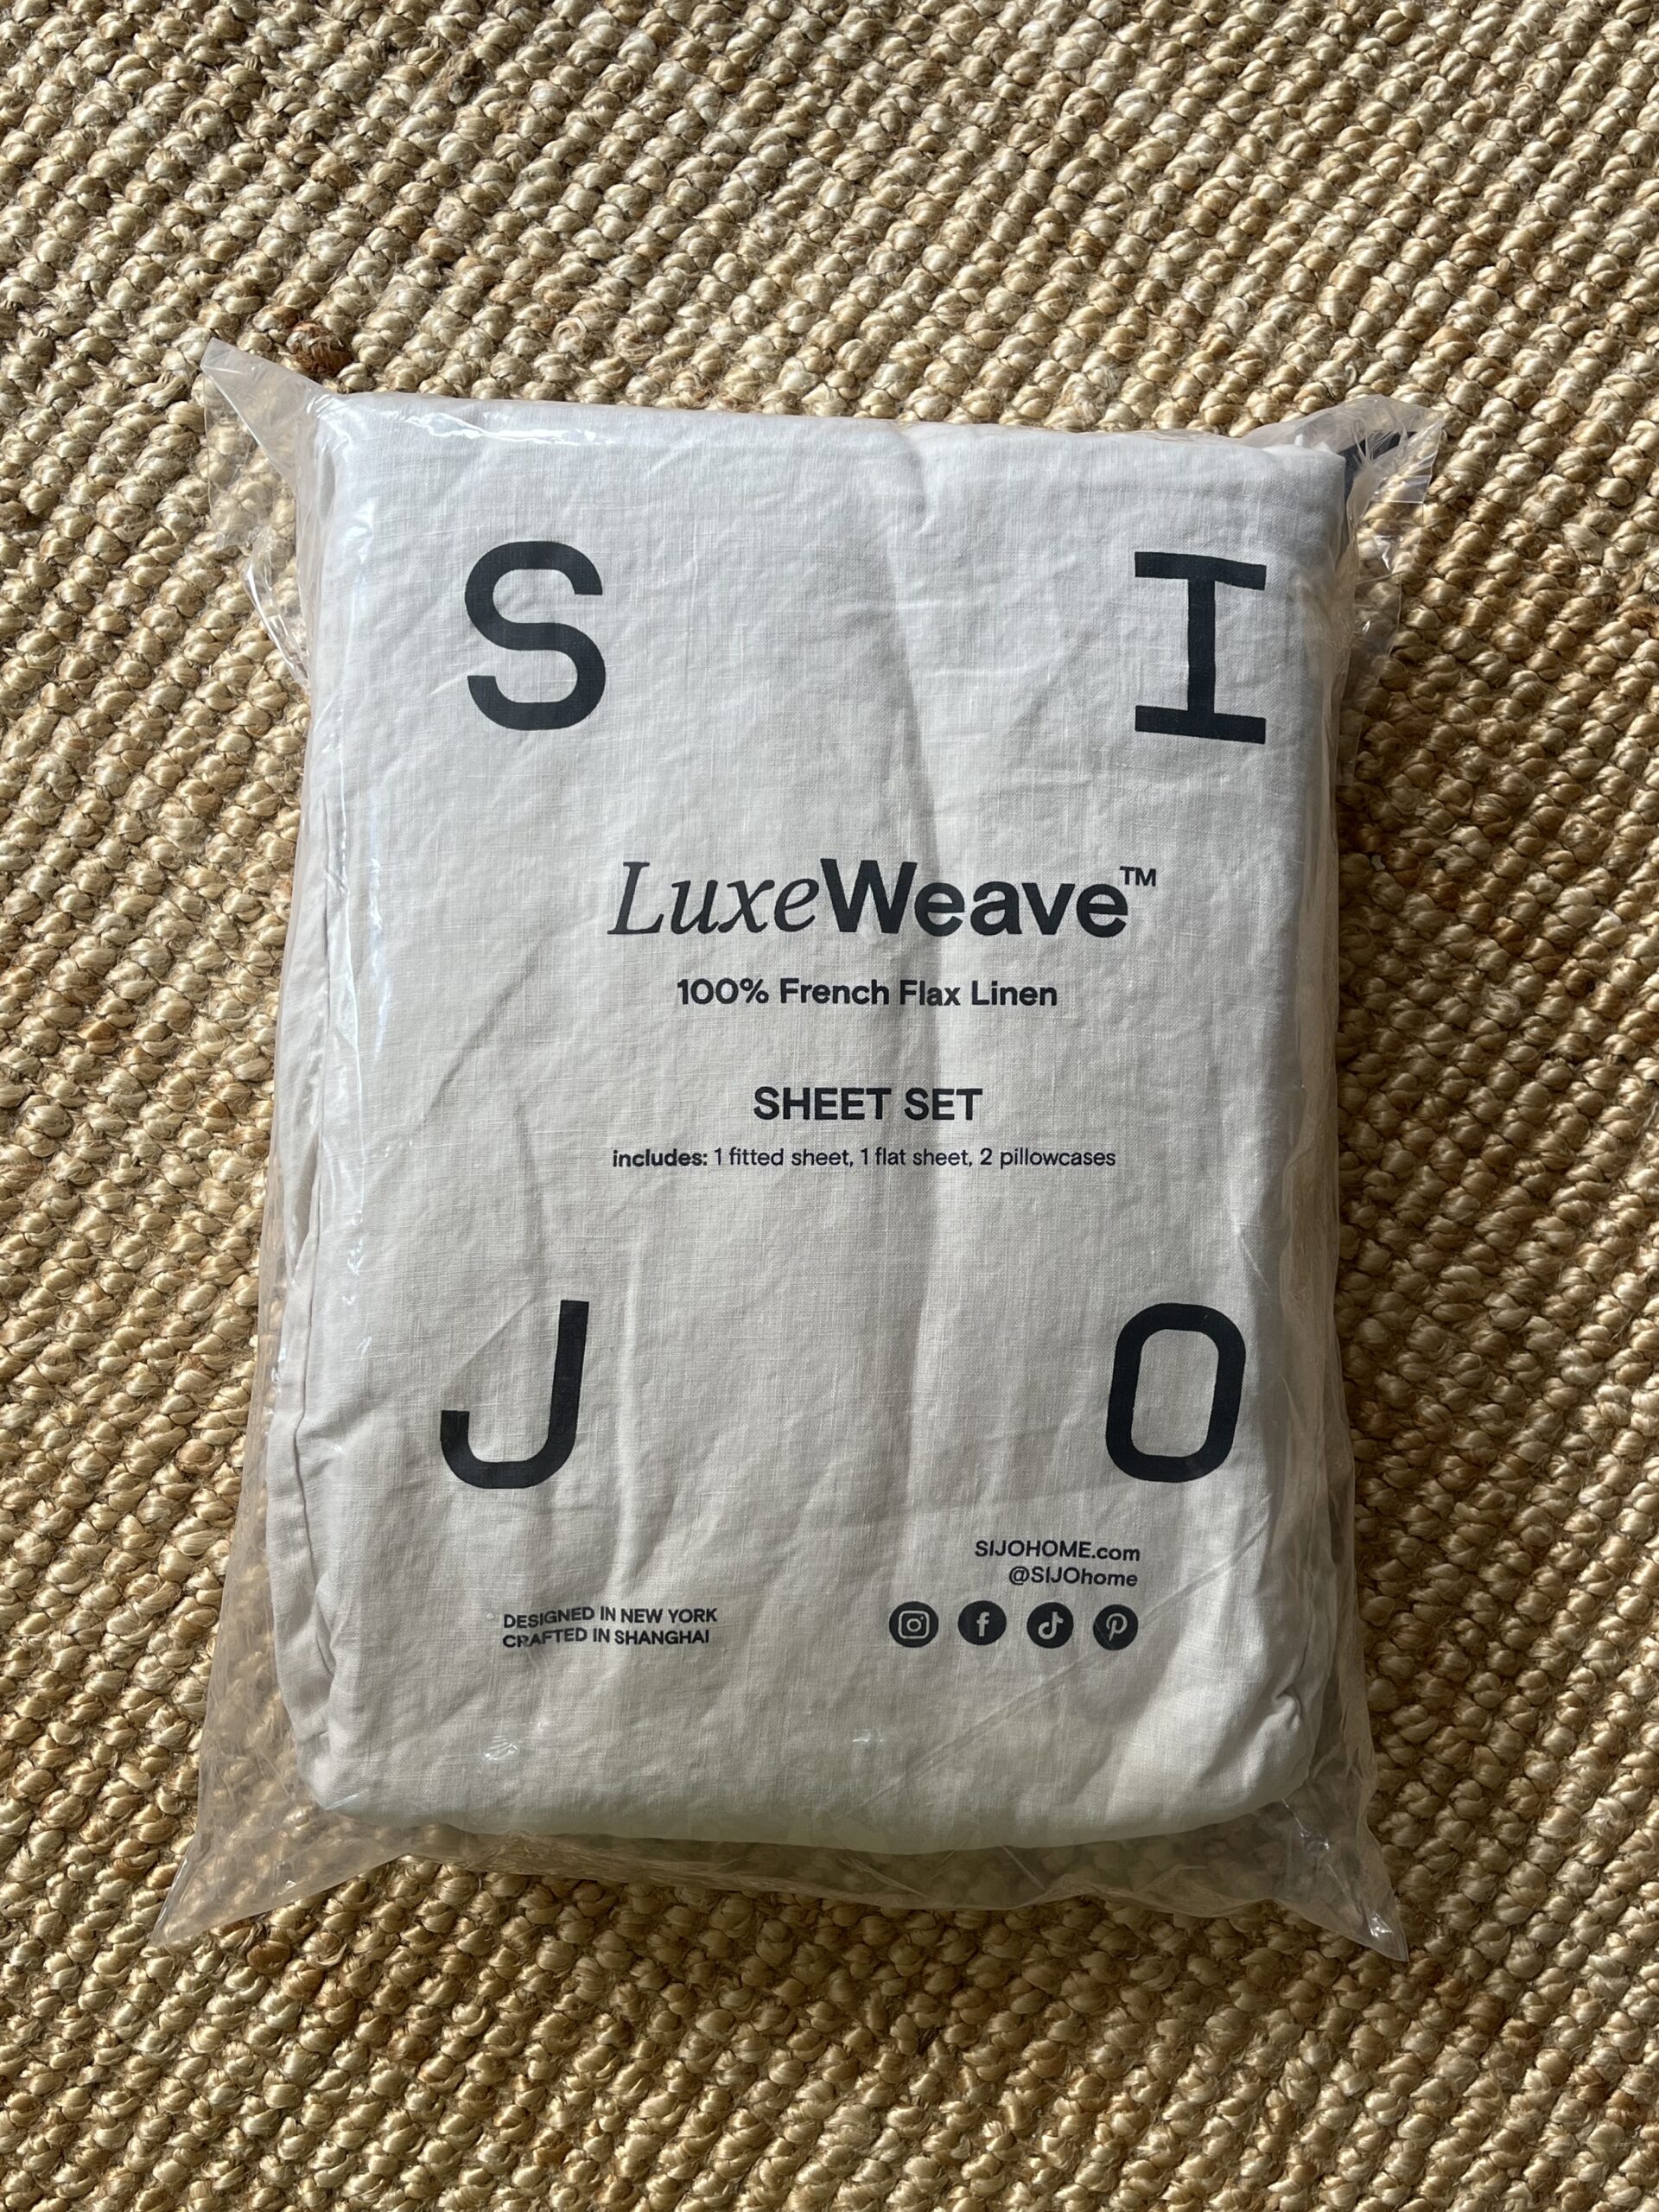 A packaged LuxeWeave sheet set labeled as 100% French Flax Linen, including 1 fitted sheet, 1 flat sheet, and 2 pillowcases, rests on a textured surface.